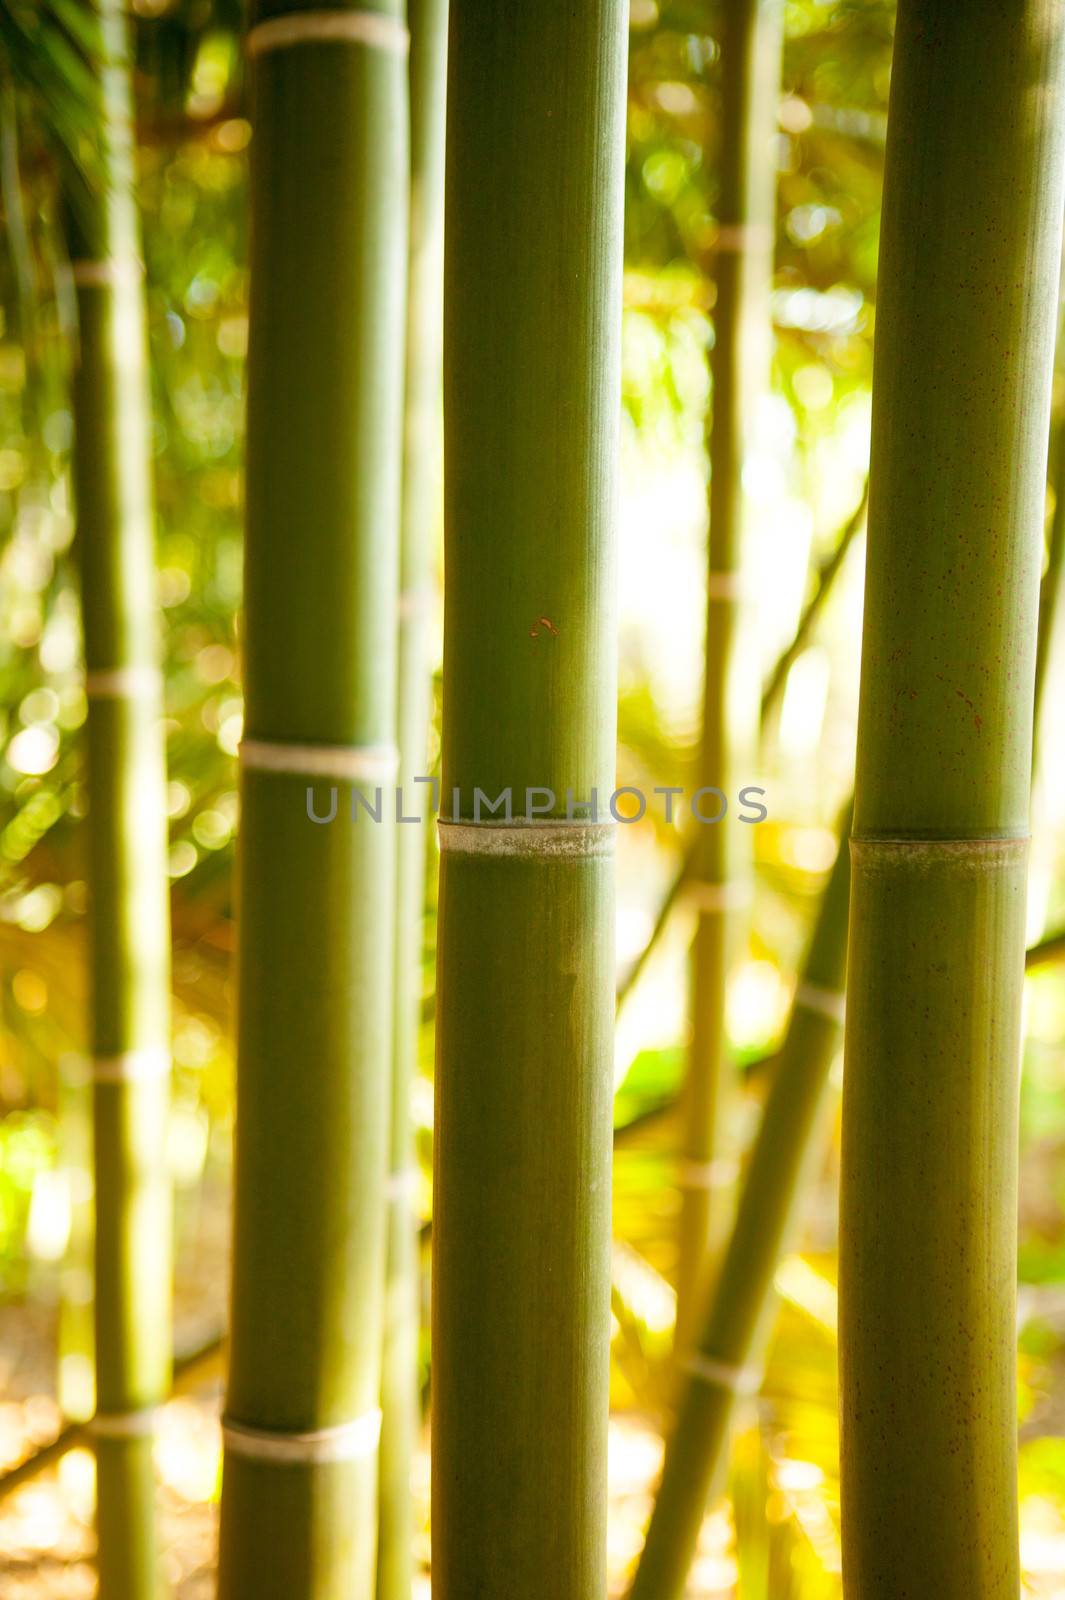 Bamboo cane tropical field with selective focus